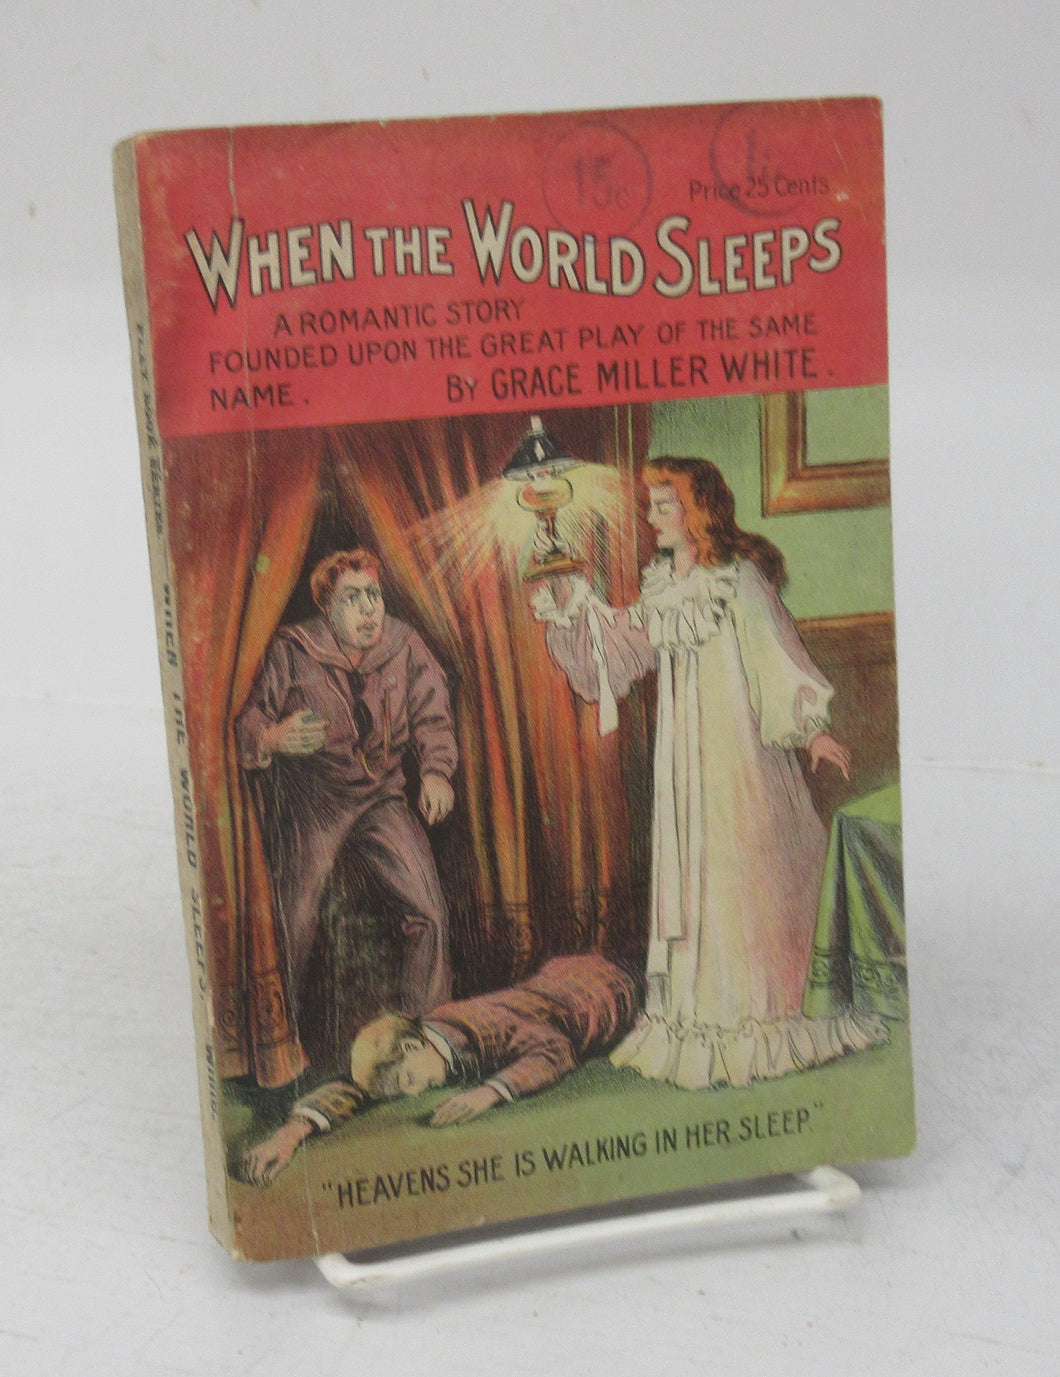 When the World Sleeps. A Romantic Story. Founded upon the Great Play of the Same Name